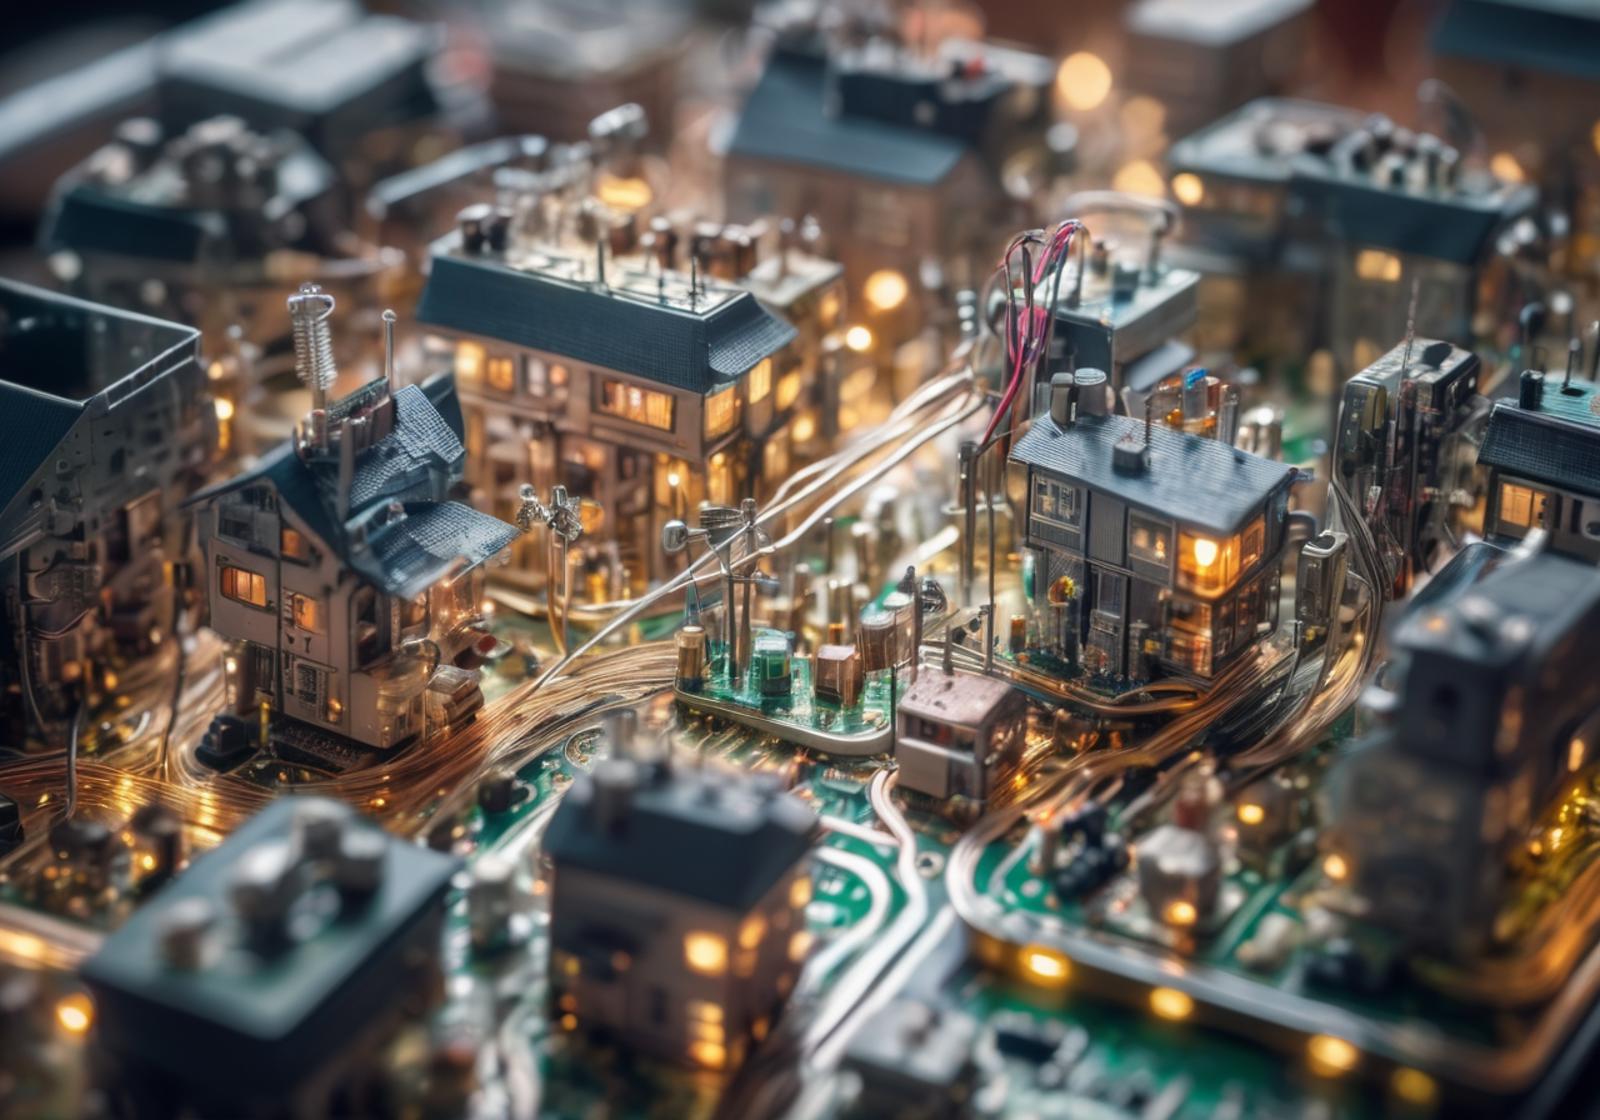 A model of a city with a miniature train and houses.